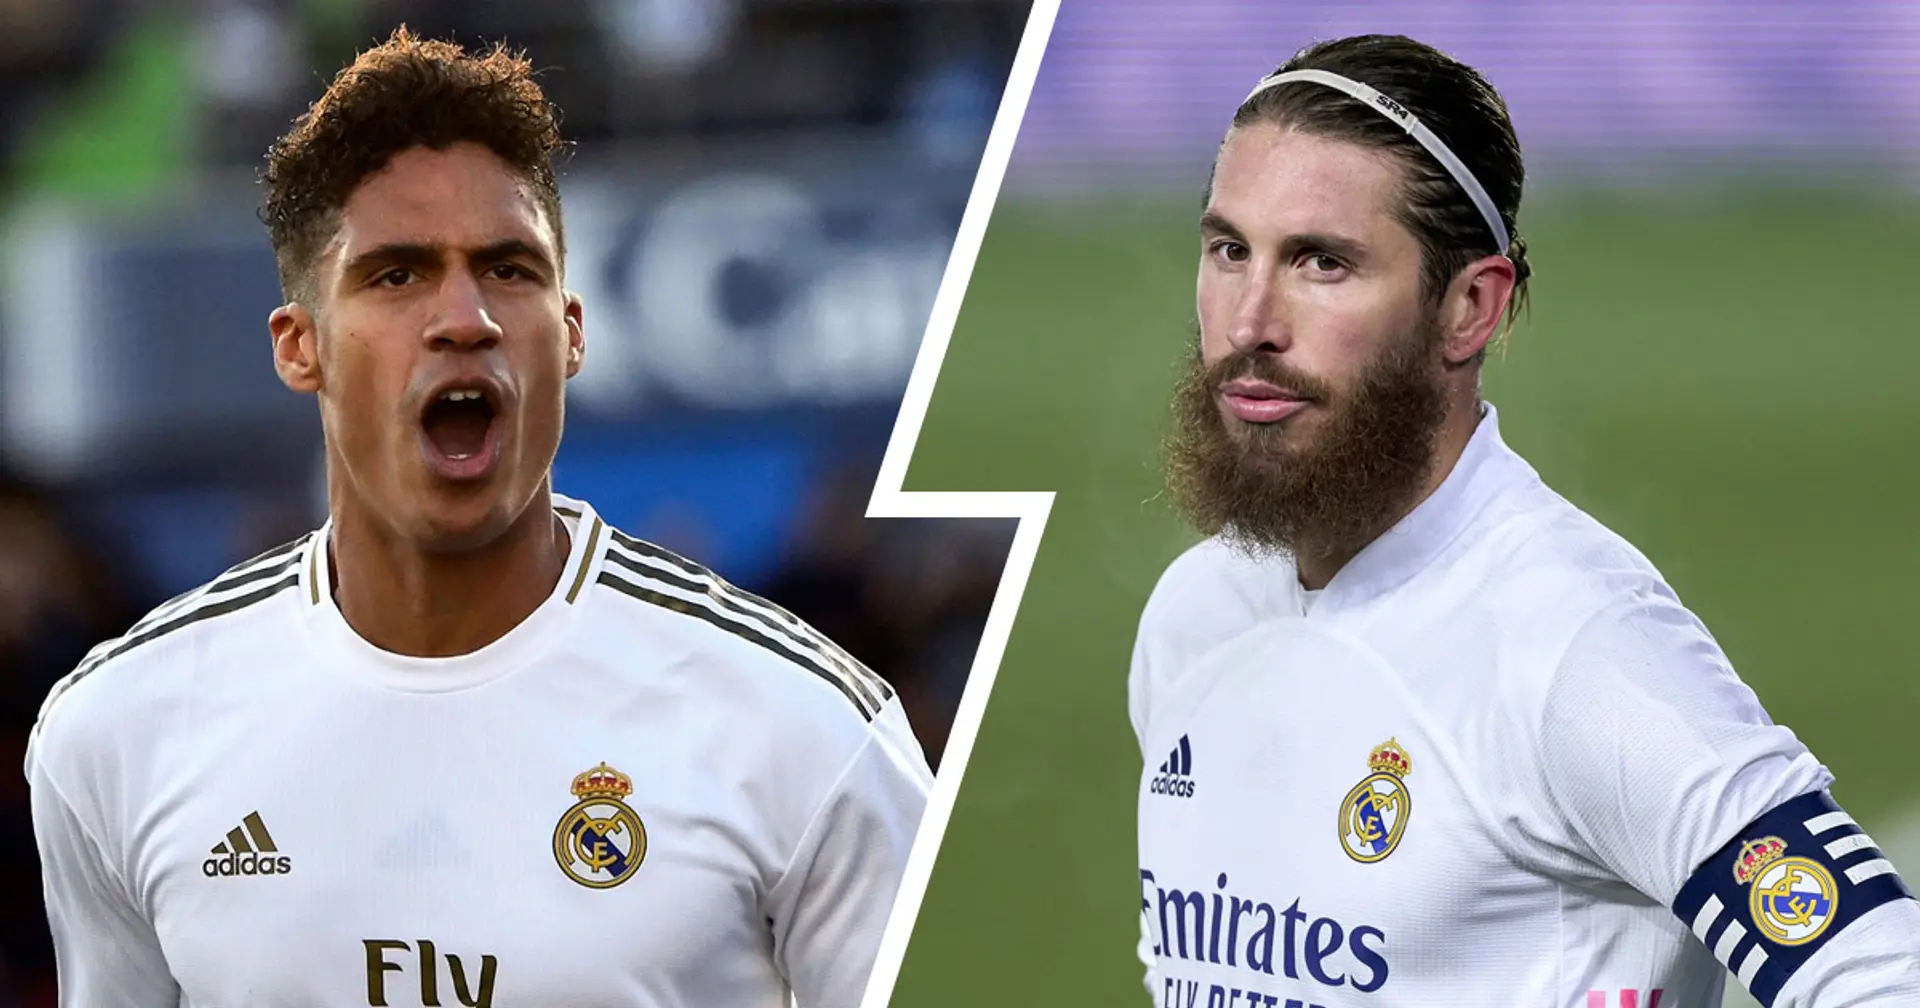 Transfer rumours, next fixtures, team news, rivals: Real Madrid latest in 1 click